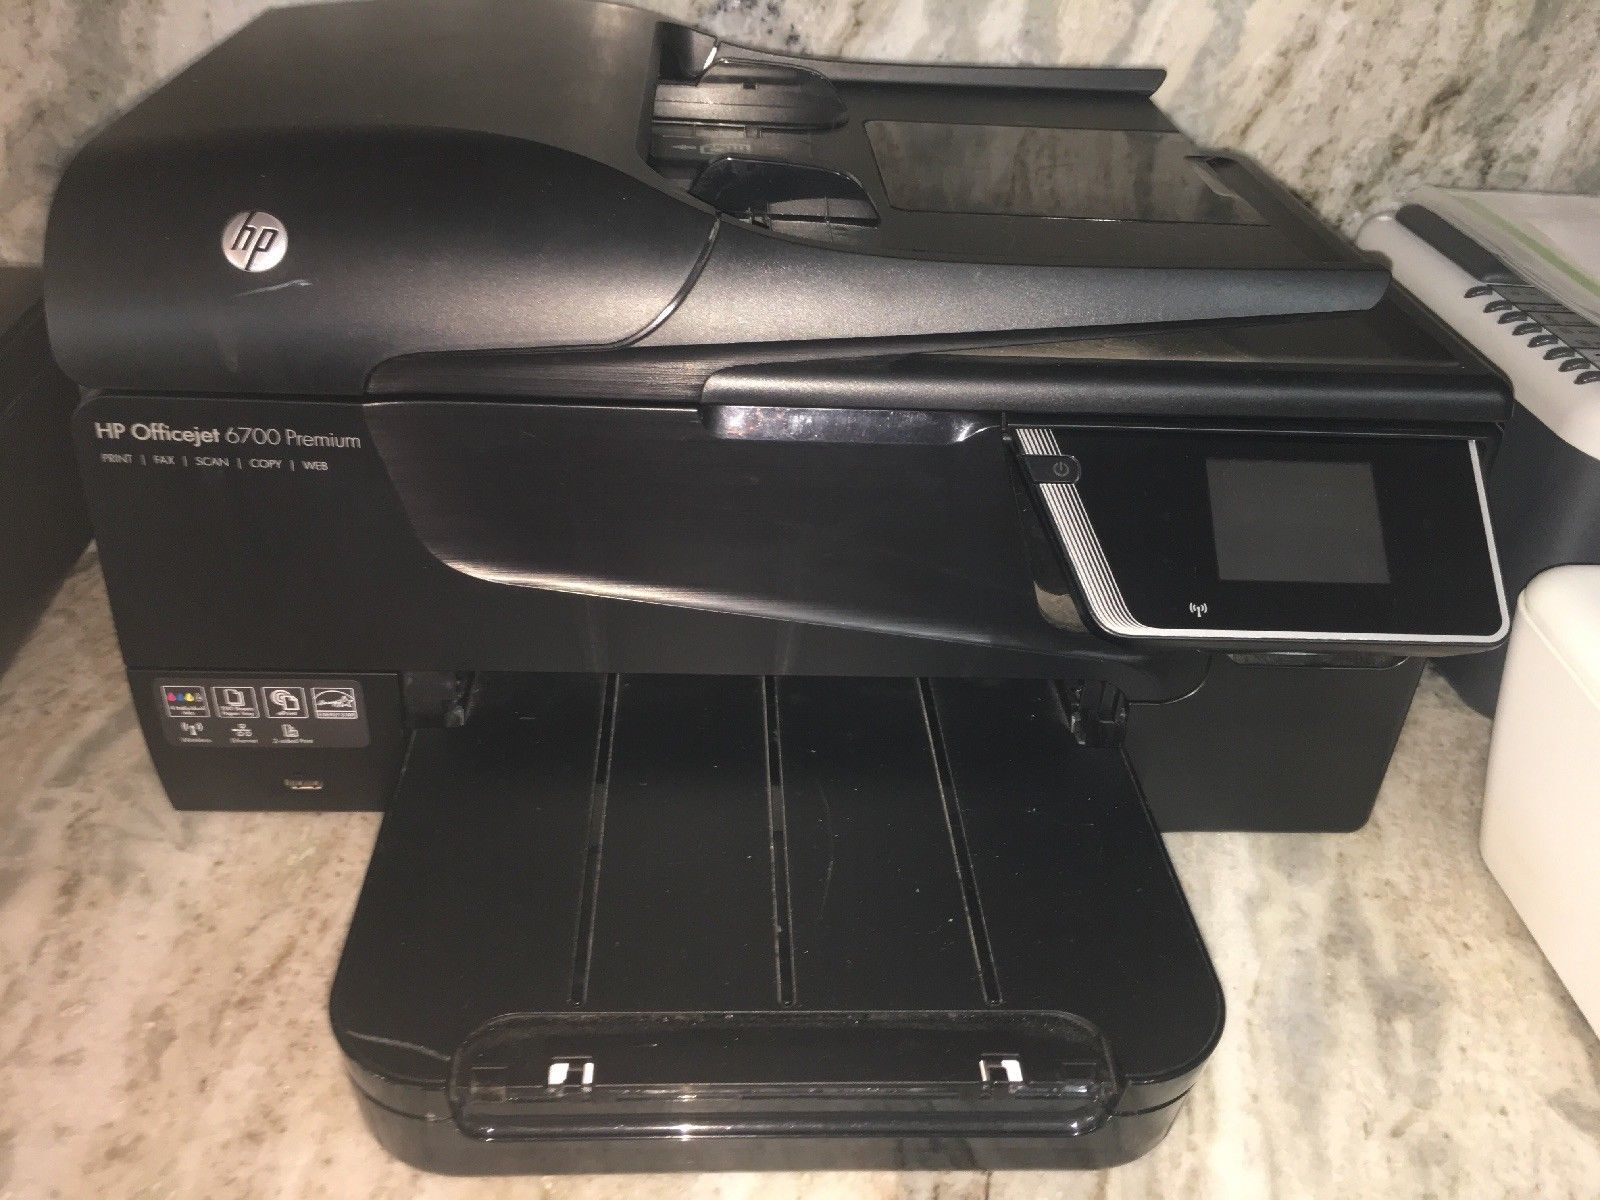 driver for hp officejet 6700 premium e-all-in-one